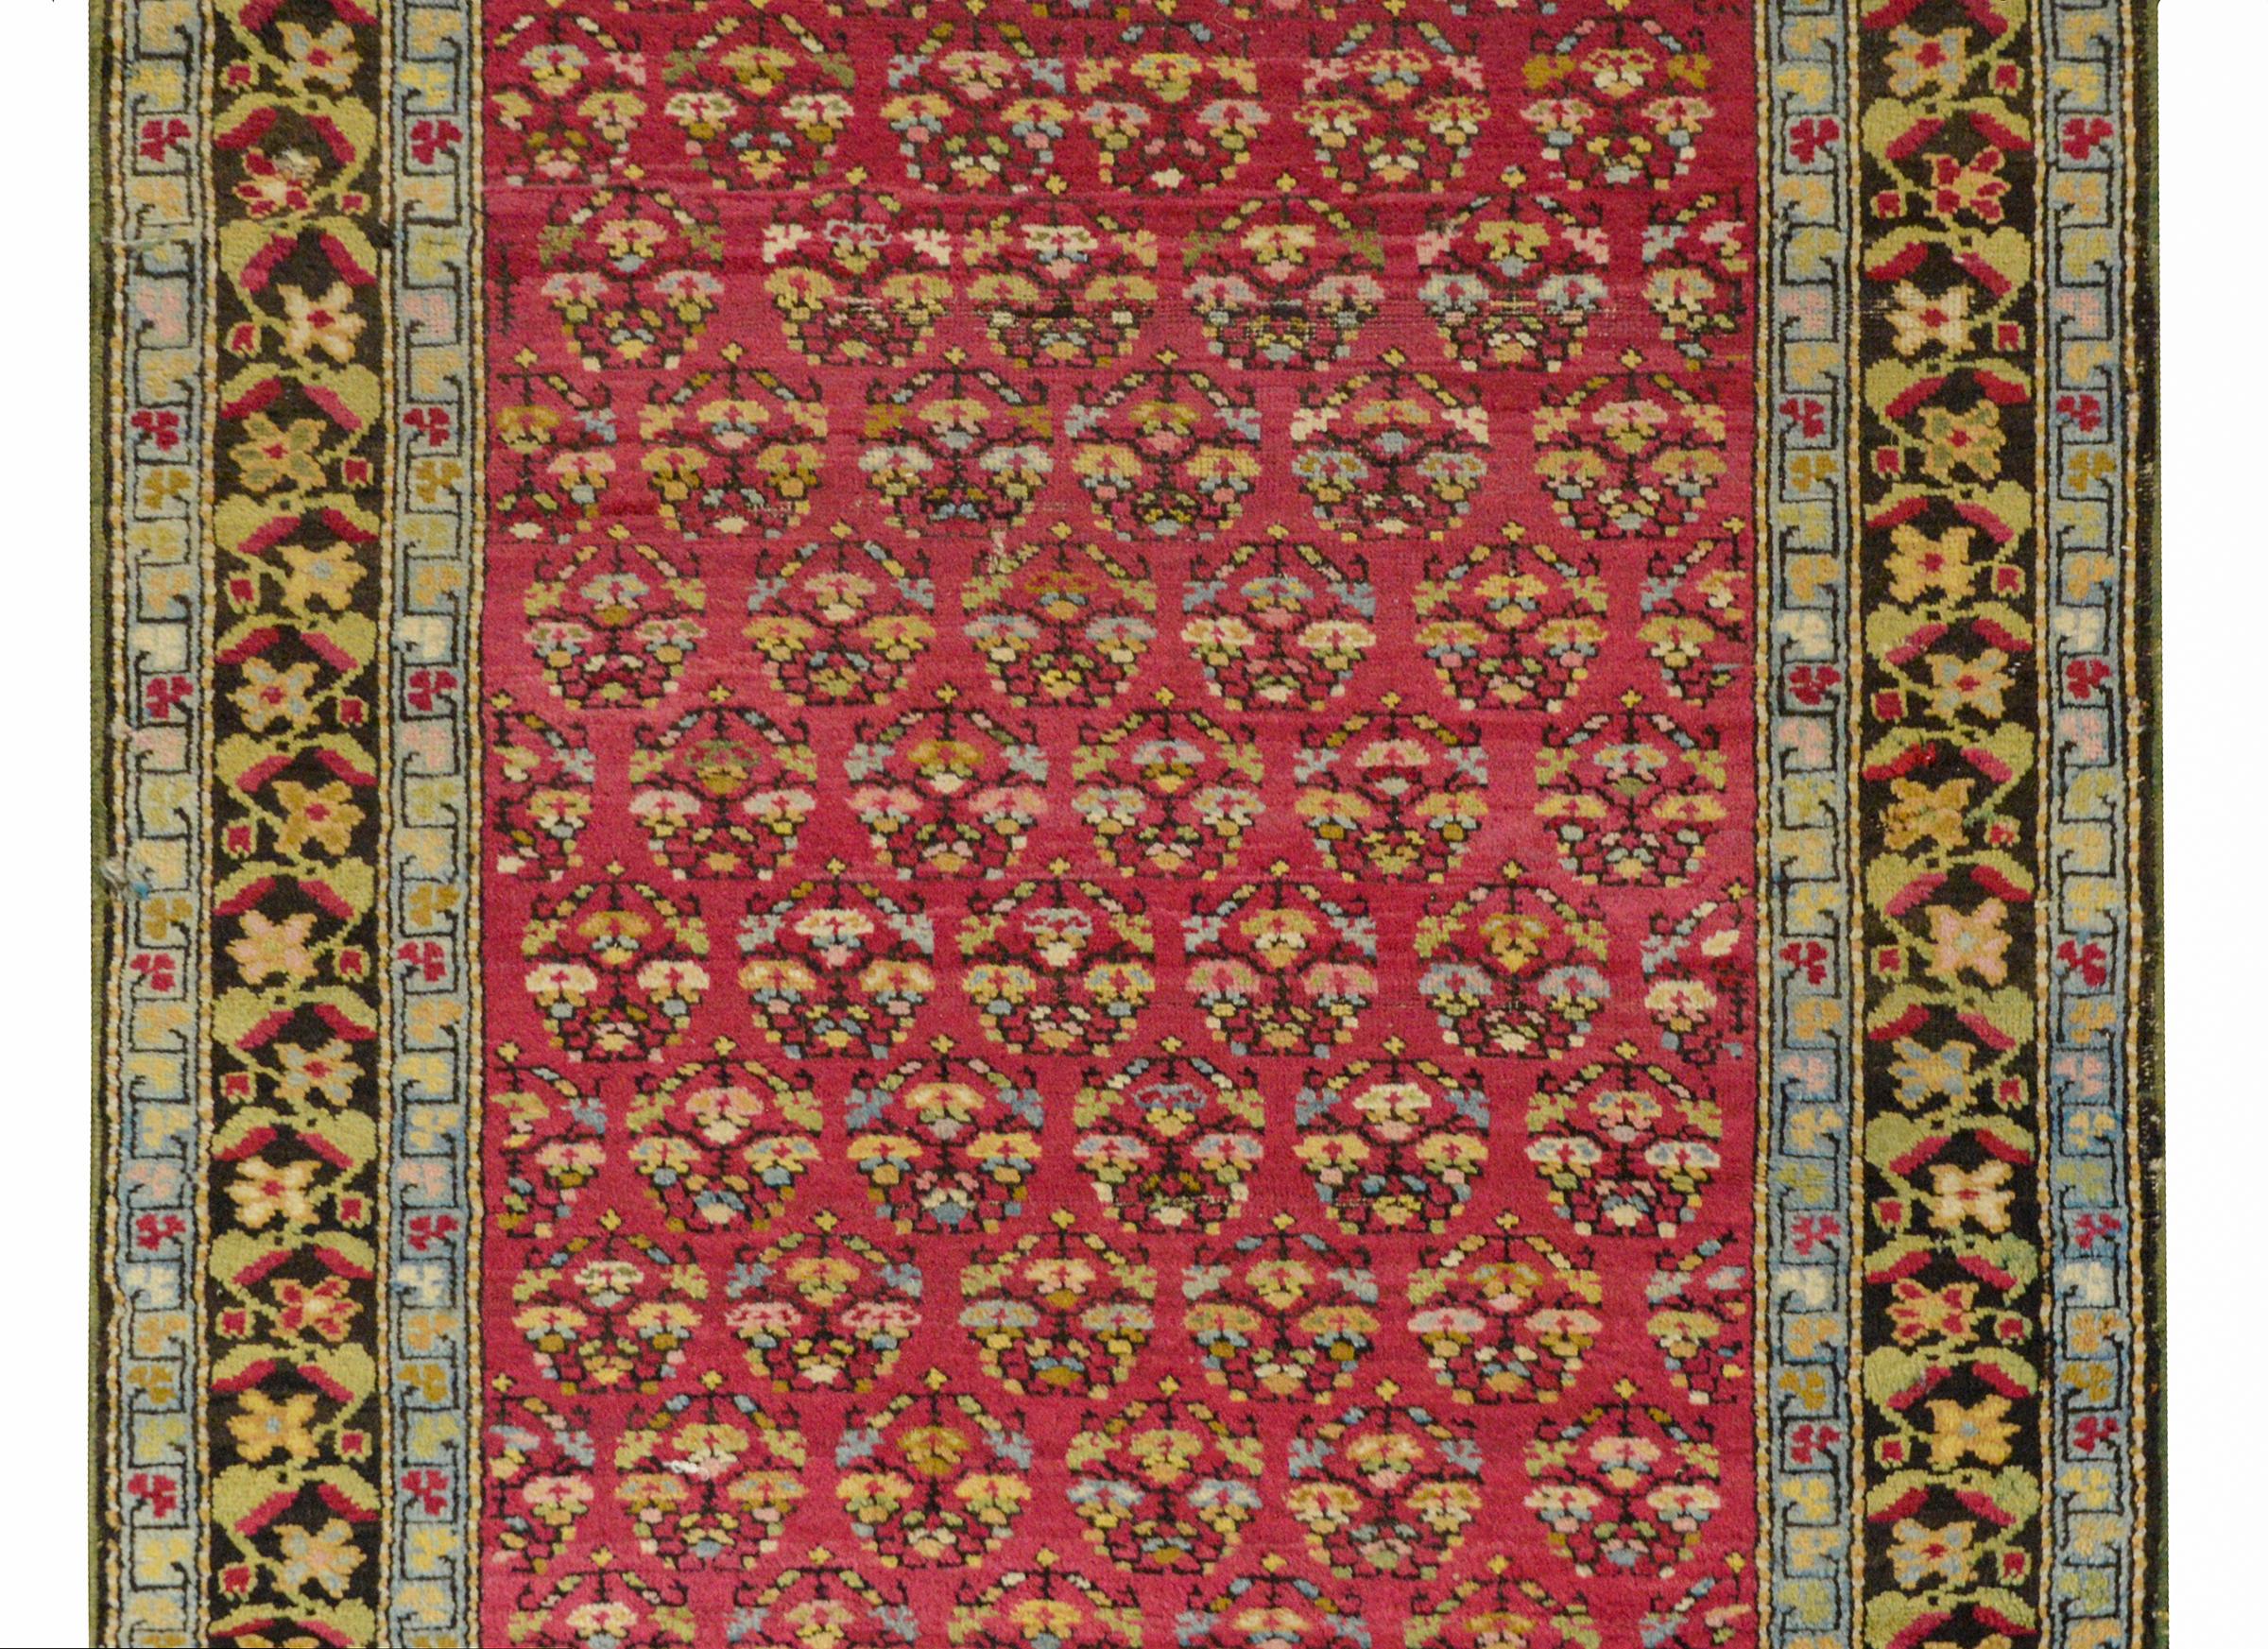 A wonderful early 20th century Karabakh runner with an all-over tree-of-life floral pattern woven in pink, gold, green, and pale indigo on a dark fuchsia background. The border is beautiful with a stylized pink and green floral and vine pattern